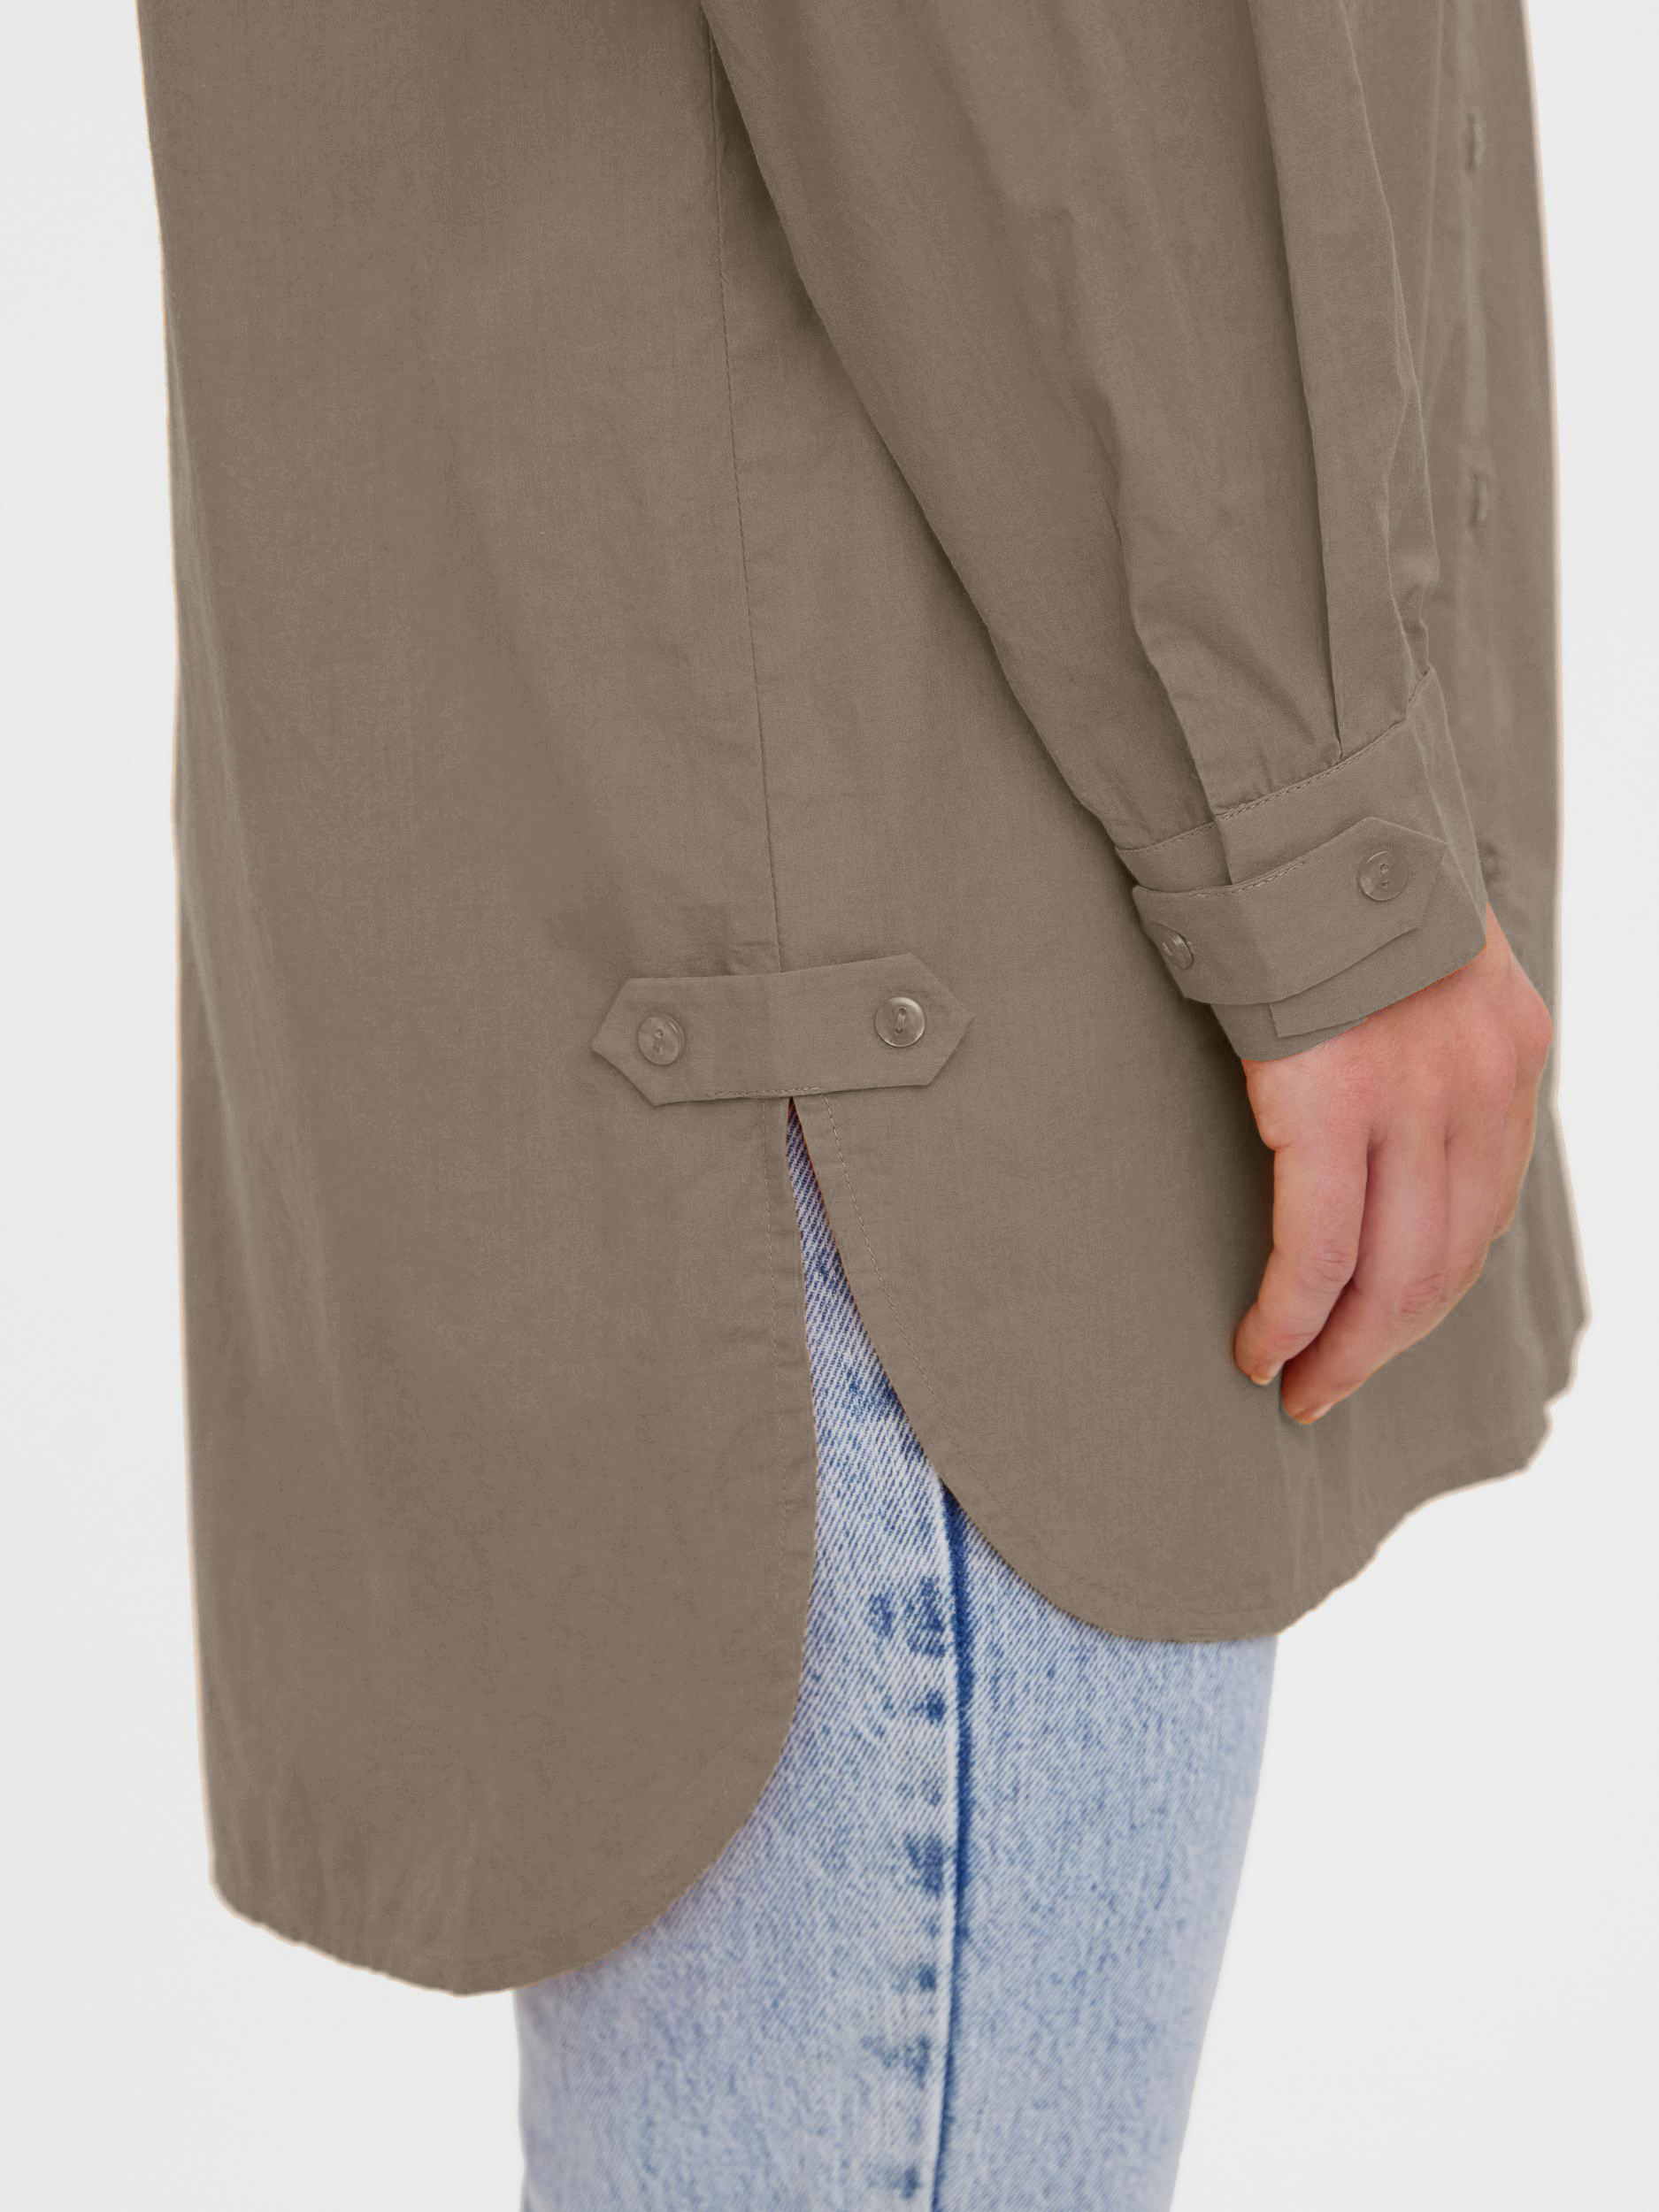 AWARE | Victory long loose-fit shirt, ROASTED CASHEW, large